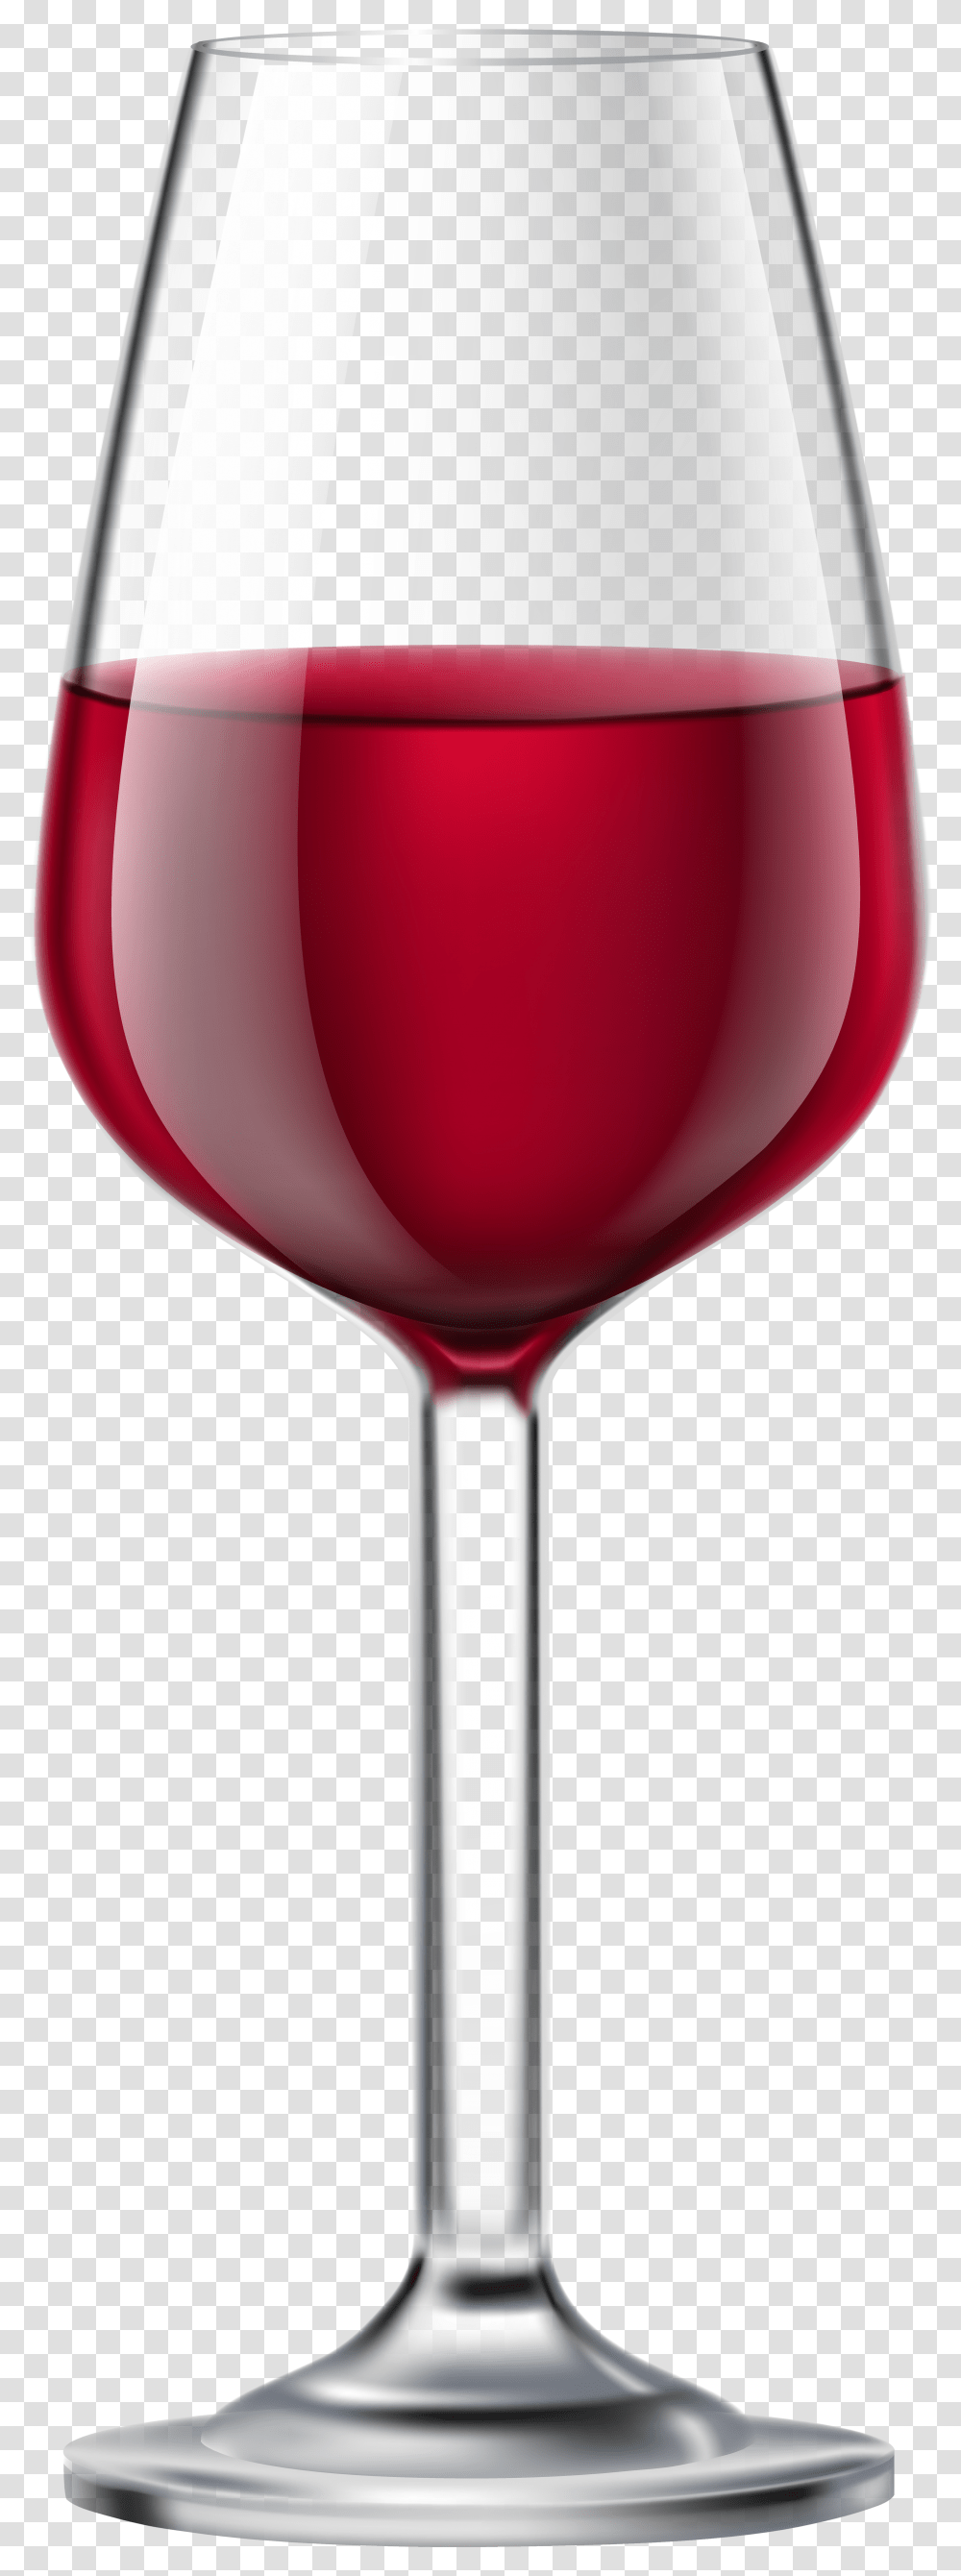 Wine Glass Clipart Stylized Background Red Wine In Glass Transparent Png